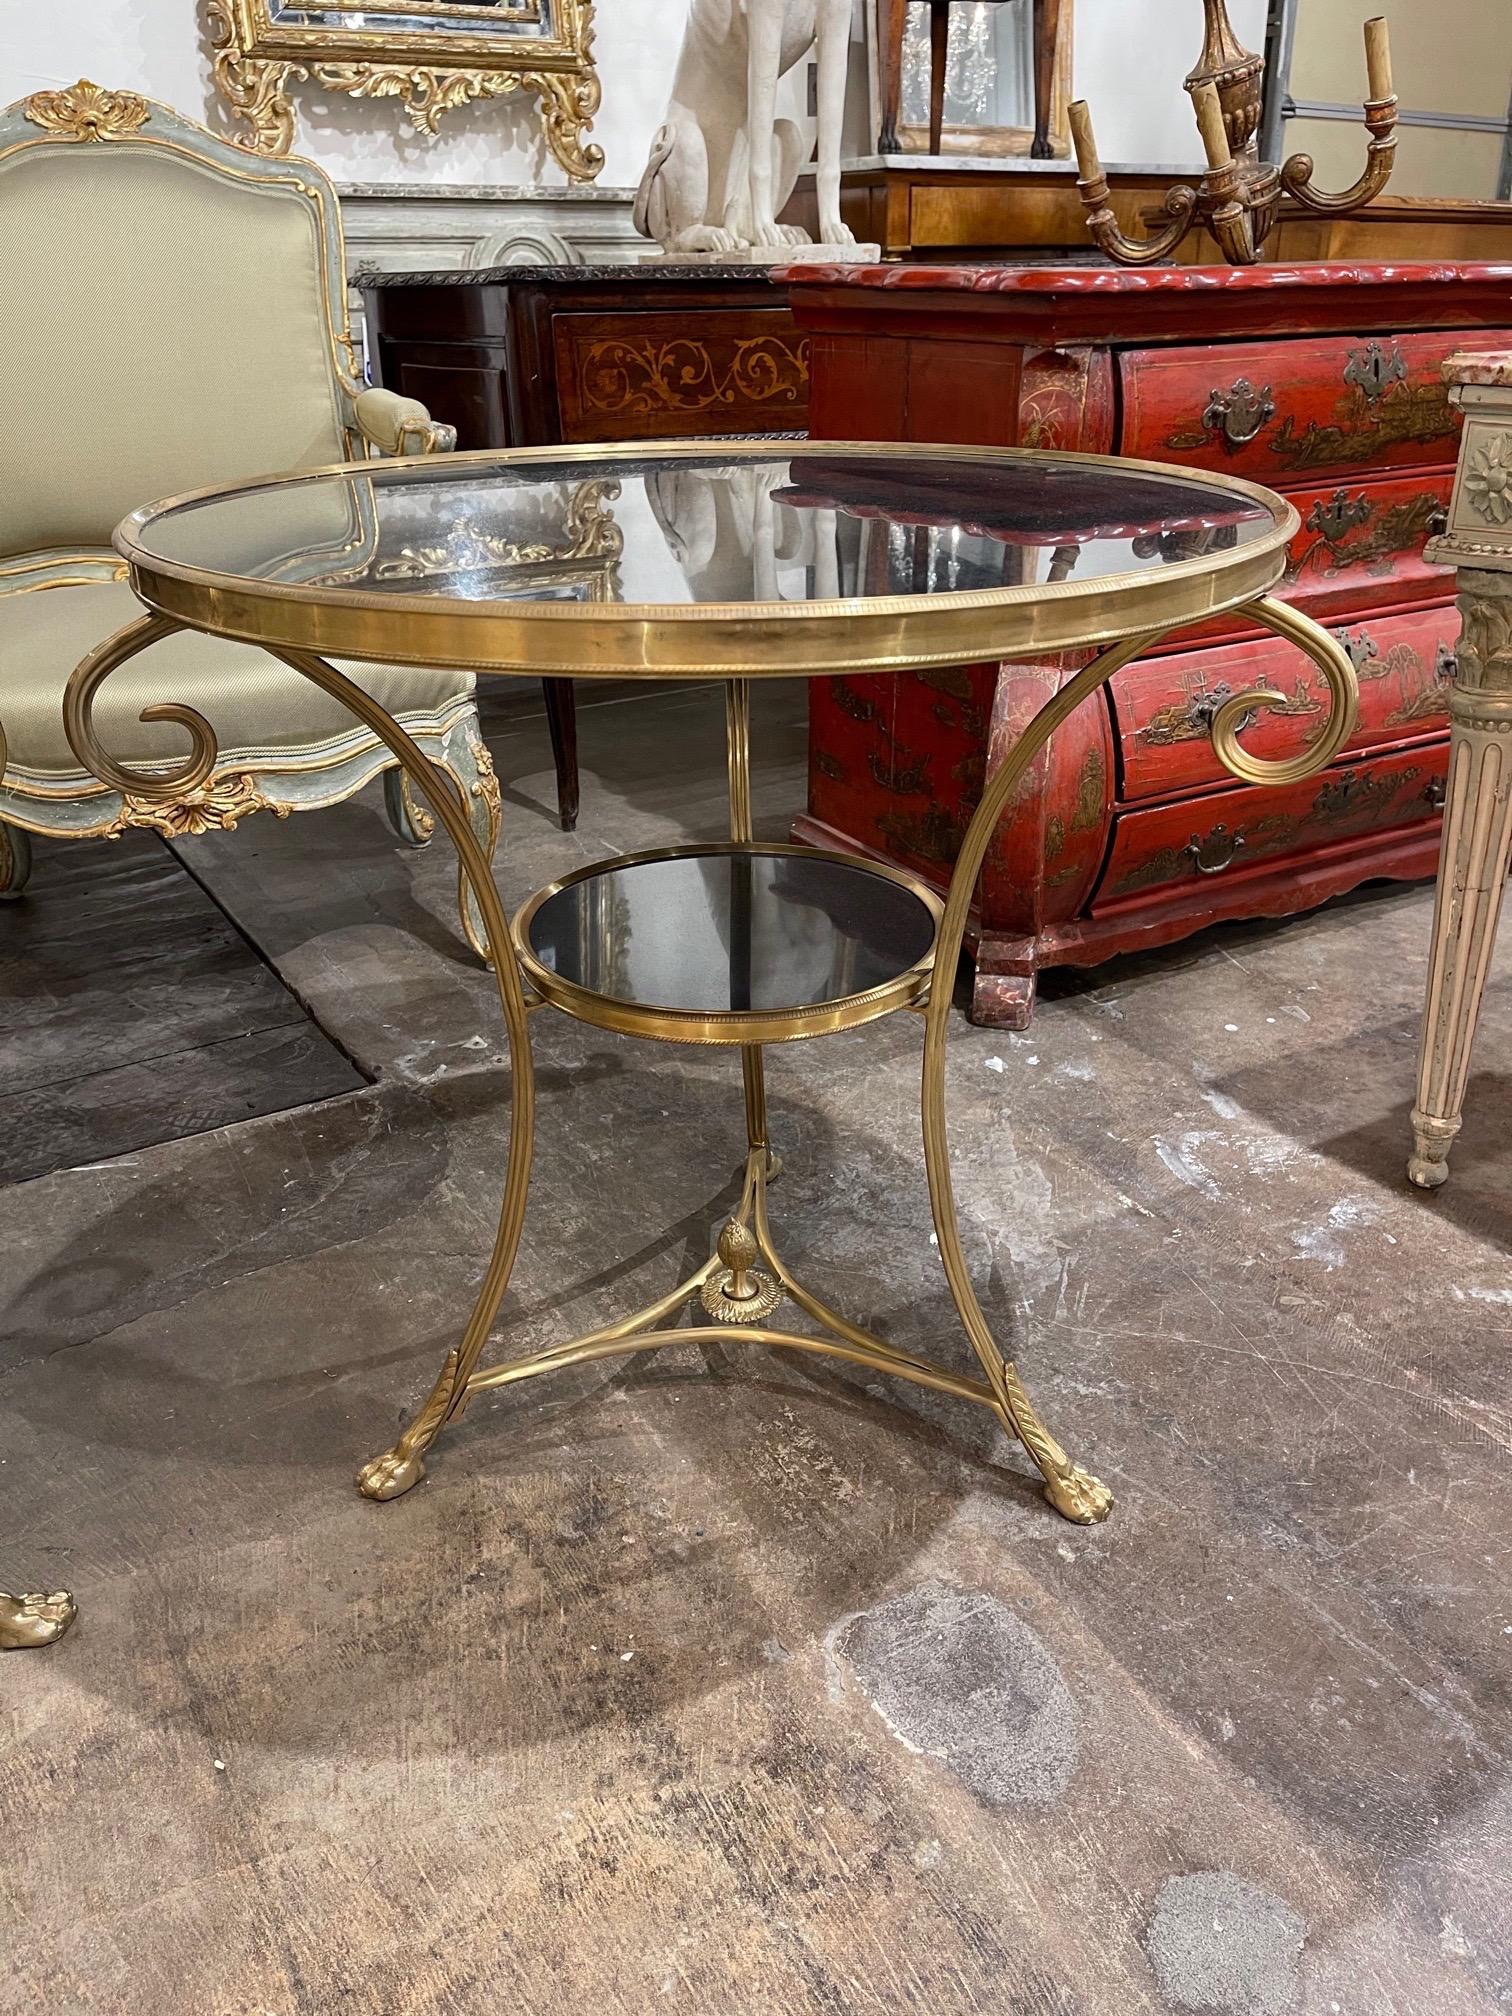 Elegant French gilt bronze and black granite Gueridon tables. Very fine quality on these. Makes an impressive statement! Note: Price listed is per item.